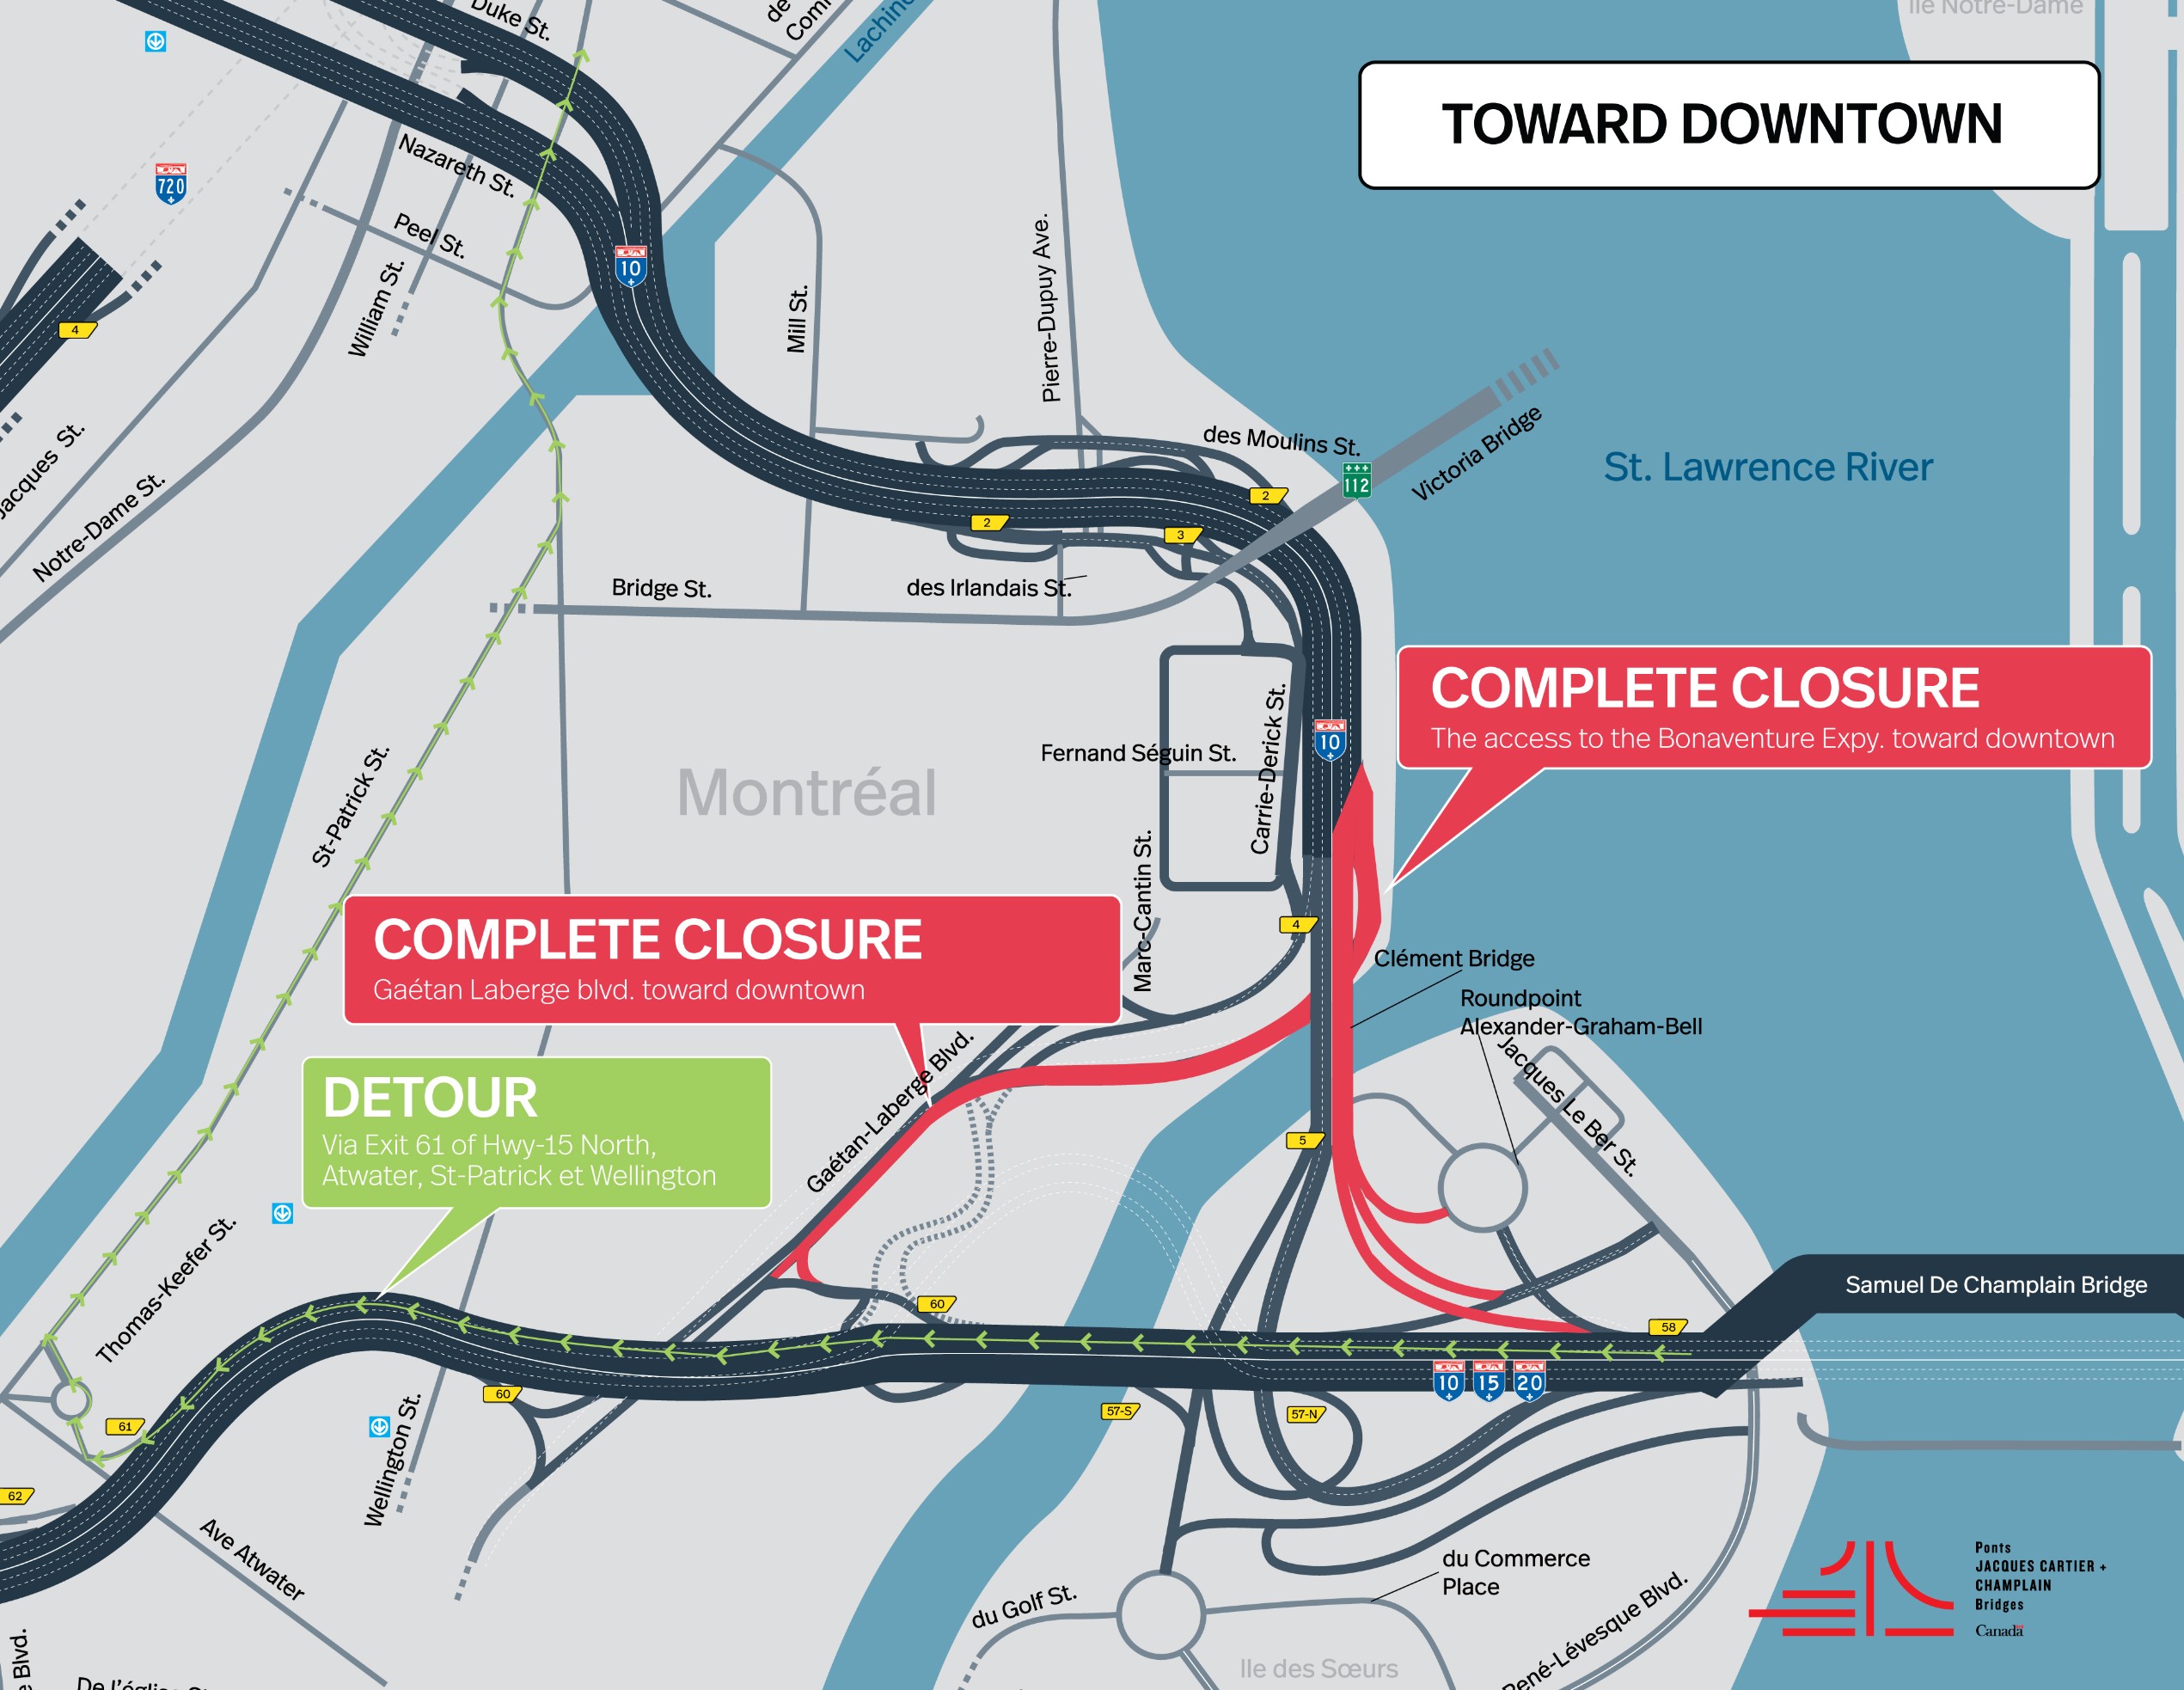 Bonaventure Expy. | Night closure of the access to the Expy., toward downtown, on July 25 and 26